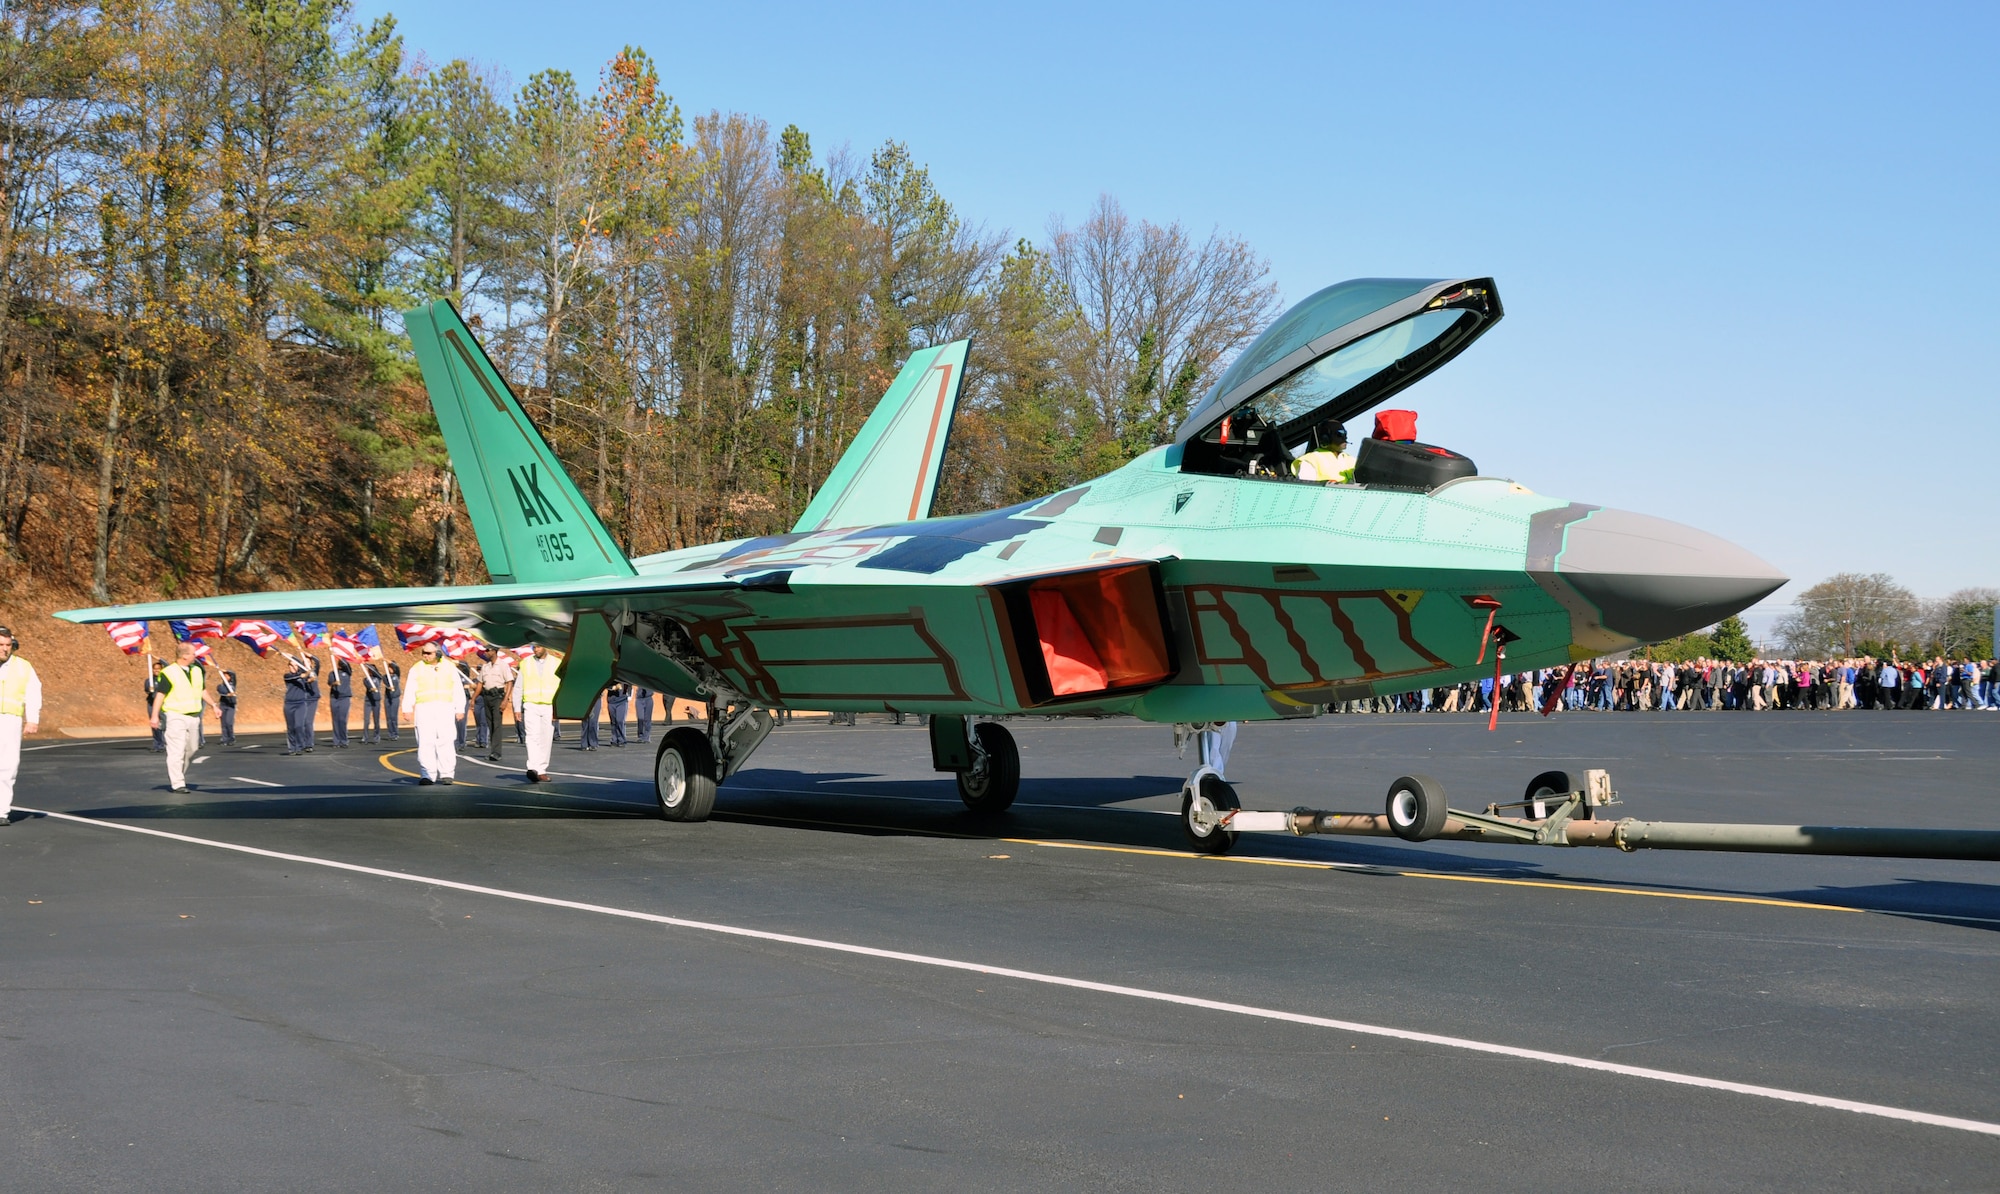 The final F-22 Raptor is led out of the Lockheed Martin assembly line followed by a local marching band, members of the military, hundreds of Lockheed employees and other supporters at the Marietta, Ga. plant Dec. 13. The jet is the last of 187 F-22s produced for the Air Force completing its operational fleet. (U.S. Air Force photo/ Senior Airman Danielle Purnell)